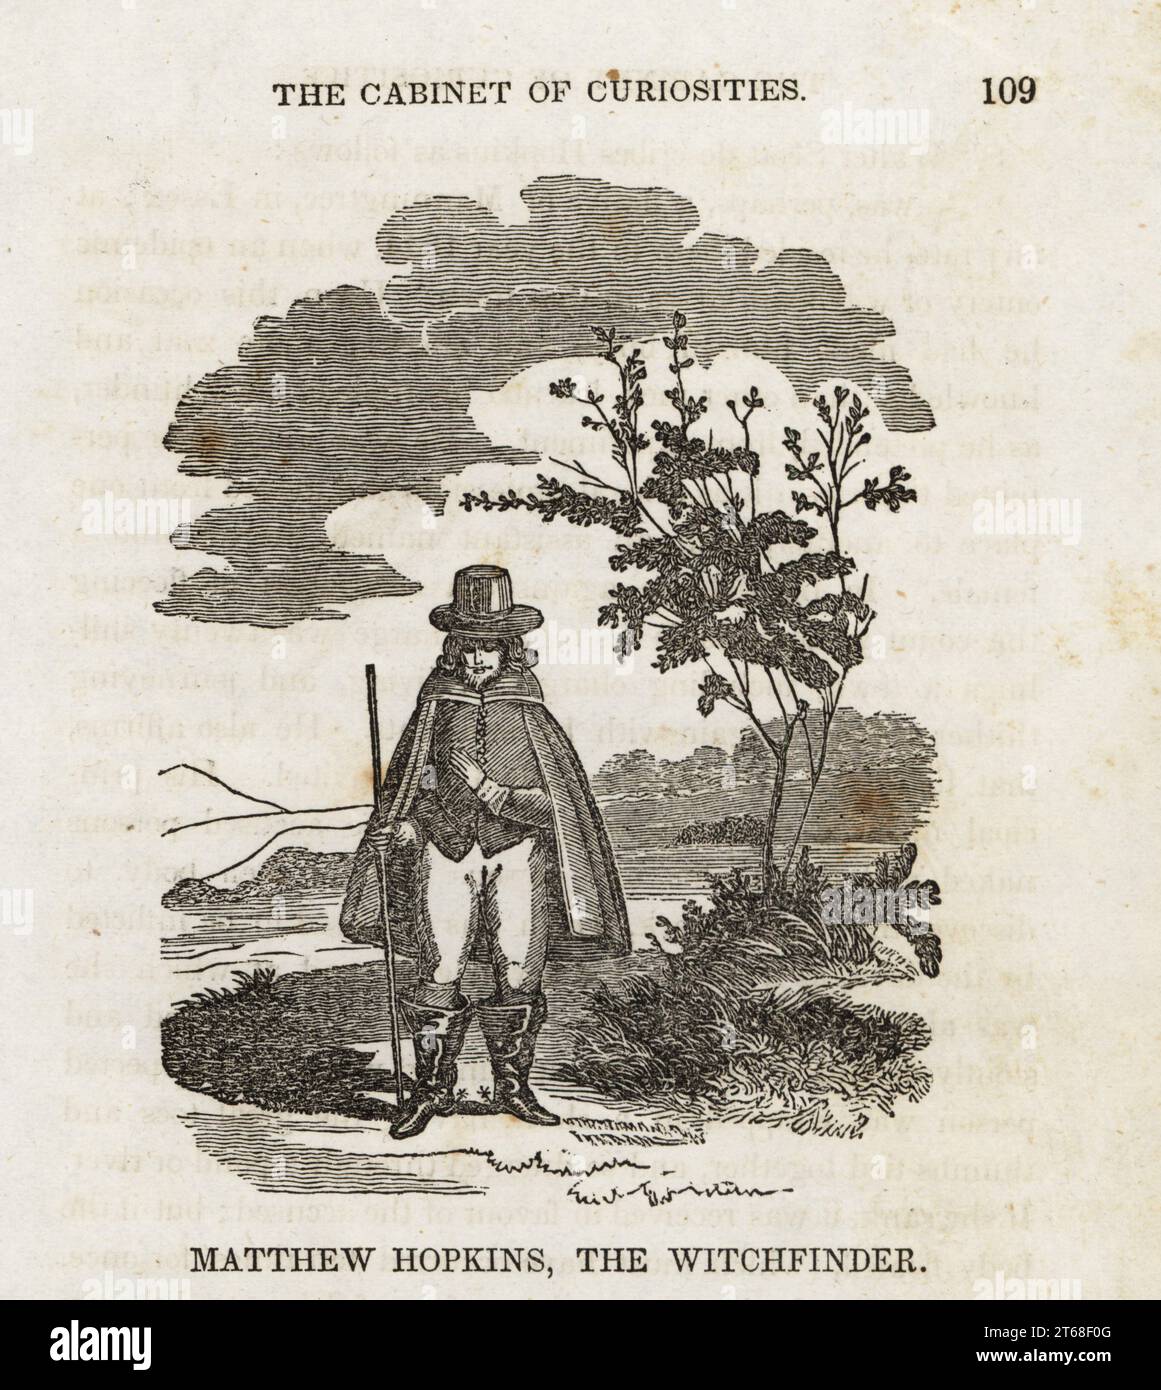 Matthew Hopkins, the Witchfinder (c. 1620-1647). Notorious witch-hunter whose career flourished during the English Civil War. Author of the Discovery of Witches. Woodcut from The Cabinet of Curiosities, or Wonders of the World Displayed, Henry Piercy, New York, 1836. Stock Photo